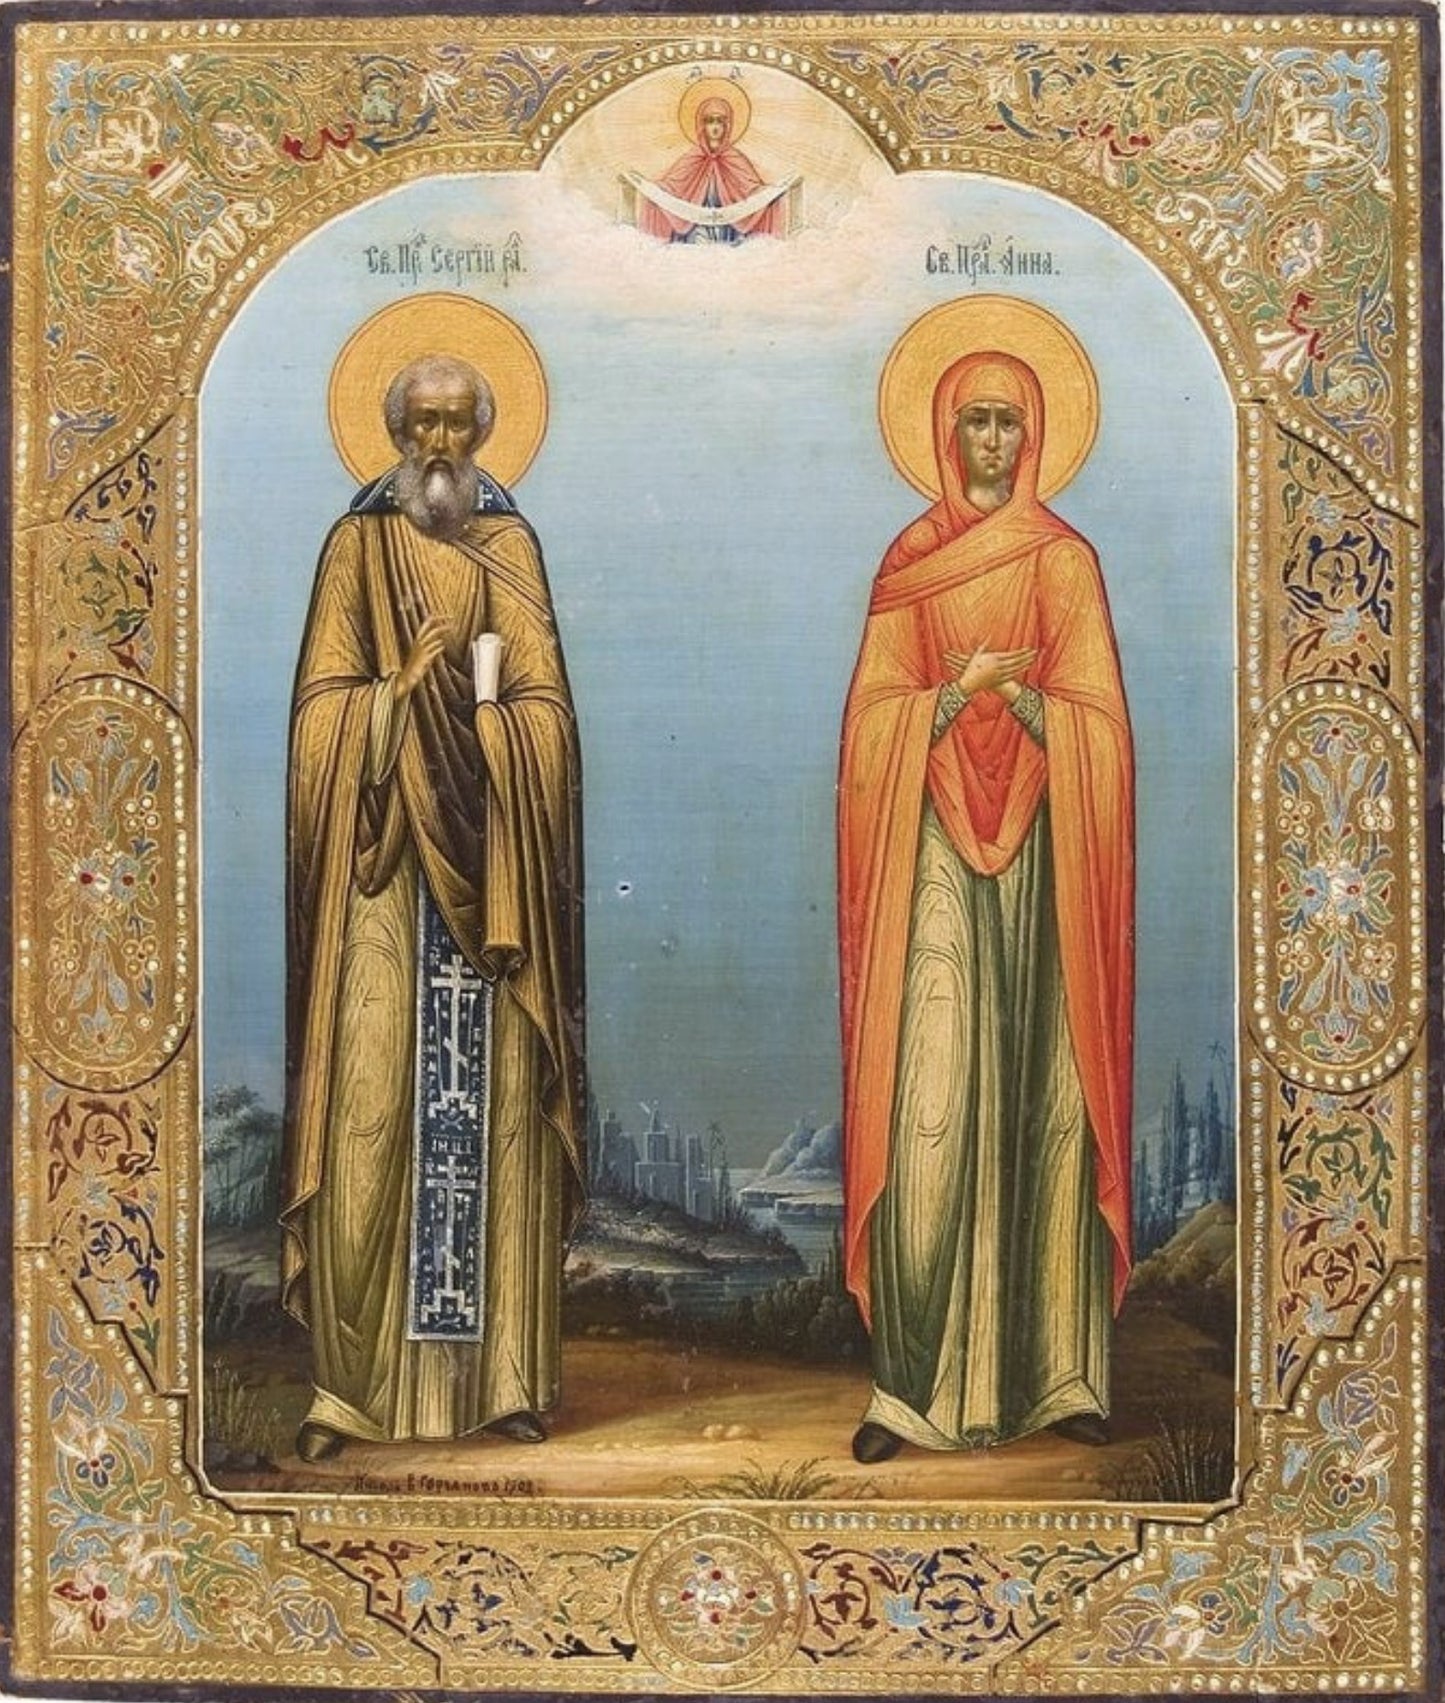 Wooden Icon of Saint Sergius of Radonezh and Reverend Anna